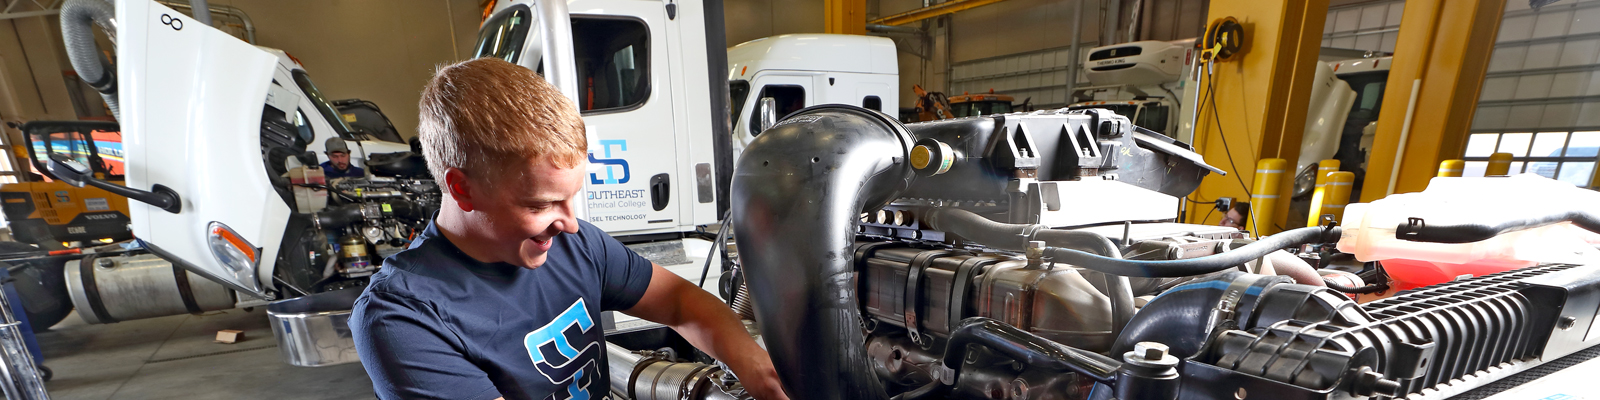 Student works on diesel engine with semi with open hood in background